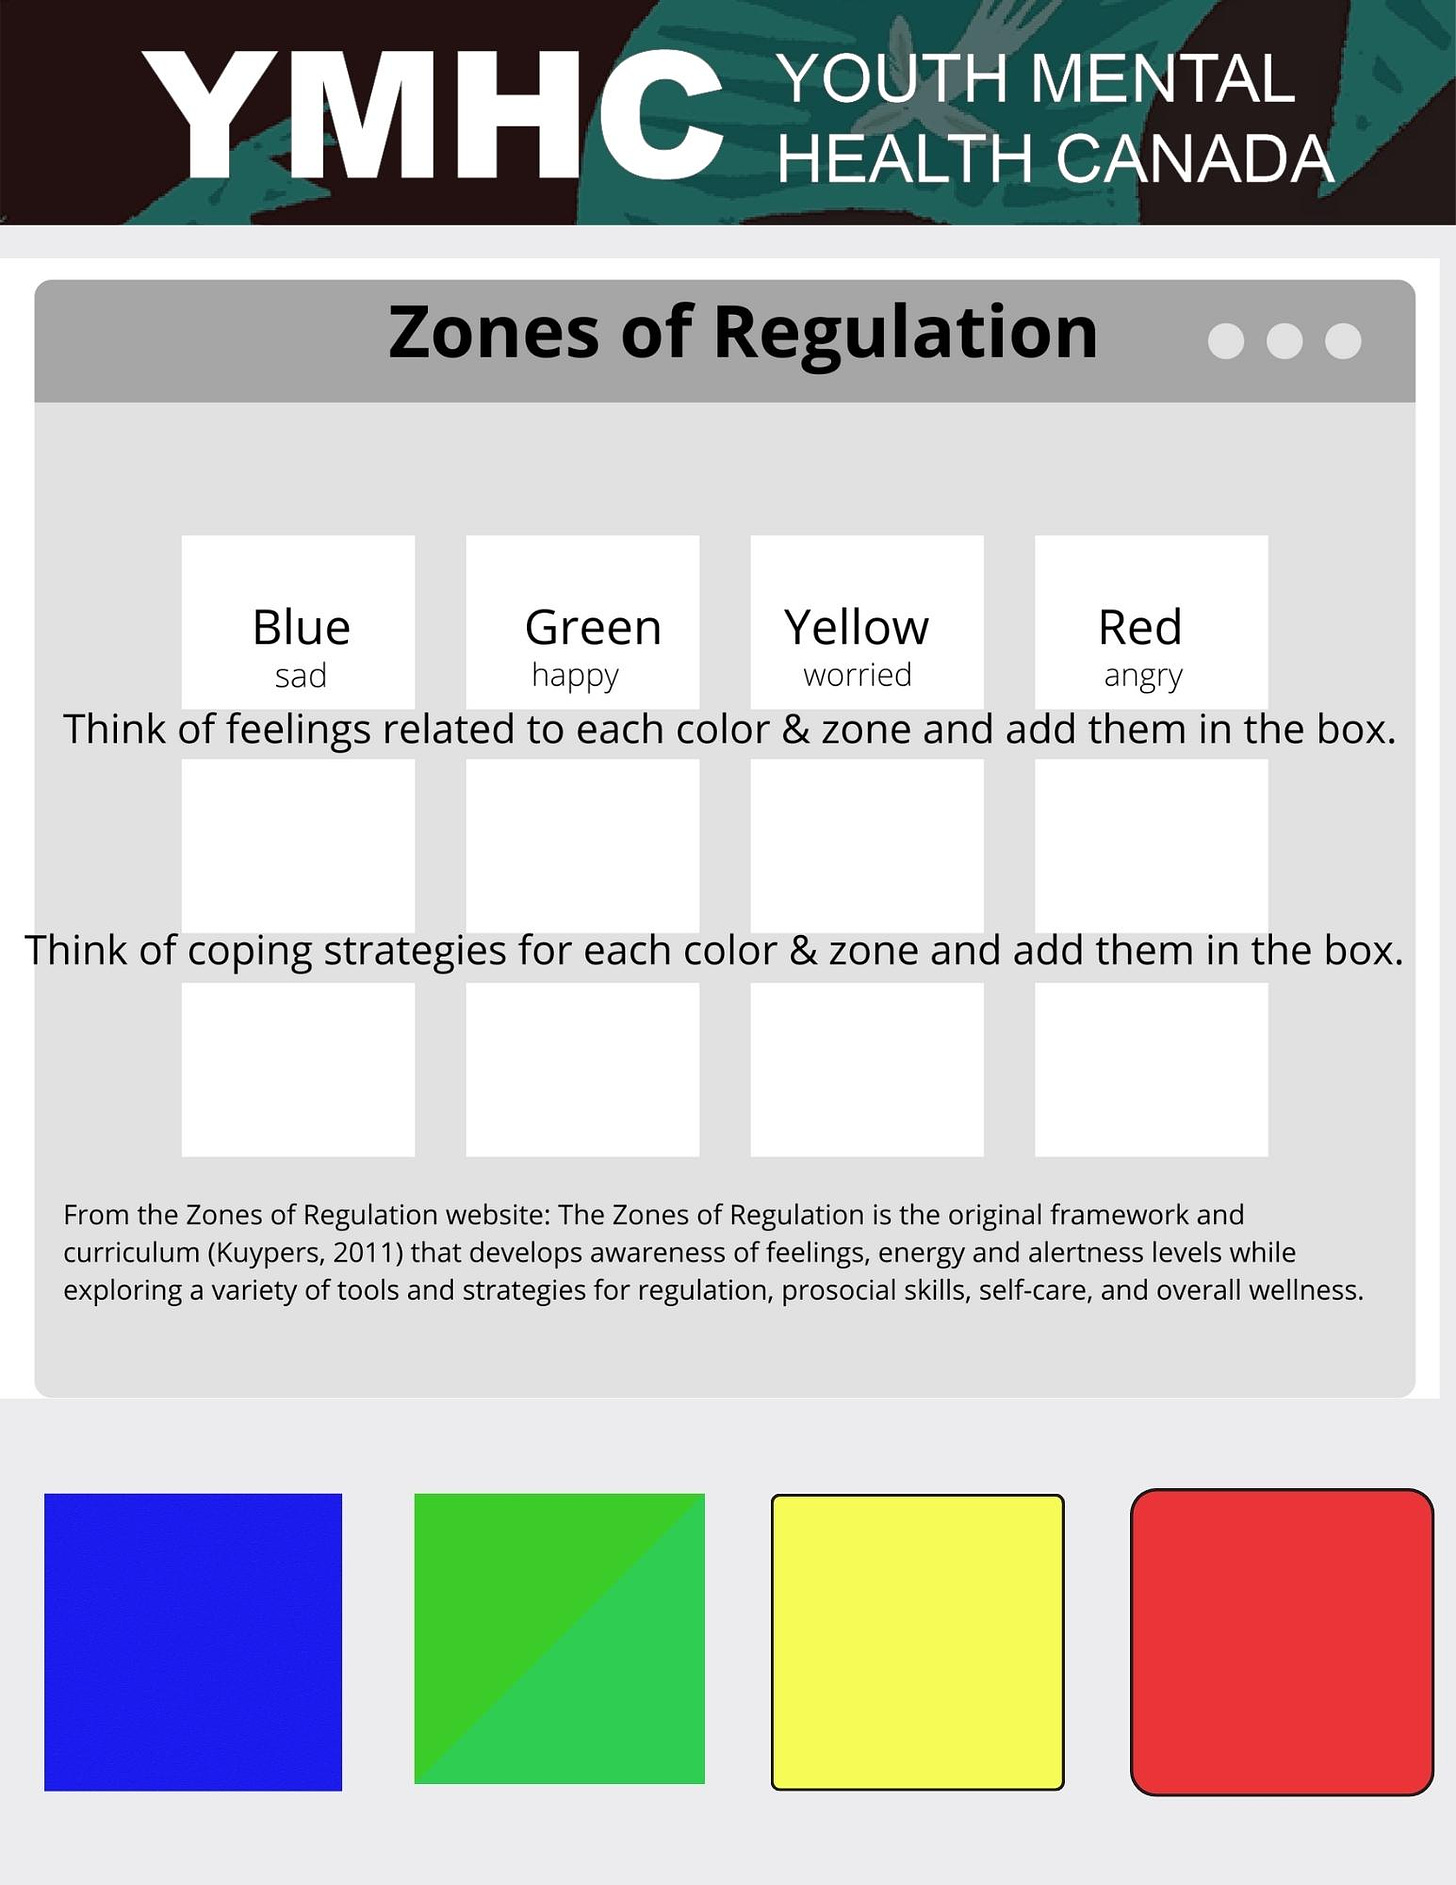 Blue Green Yellow Red sad happy worried angry Think of feelings related to each color & zone and add them in the box. Think of coping strategies for each color & zone and add them in the box. From the Zones of Regulation website: The Zones of Regulation is the original framework and curriculum (Kuypers, 2011) that develops awareness of feelings, energy and alertness levels while exploring a variety of tools and strategies for regulation, prosocial skills, self-care, and overall wellness. 